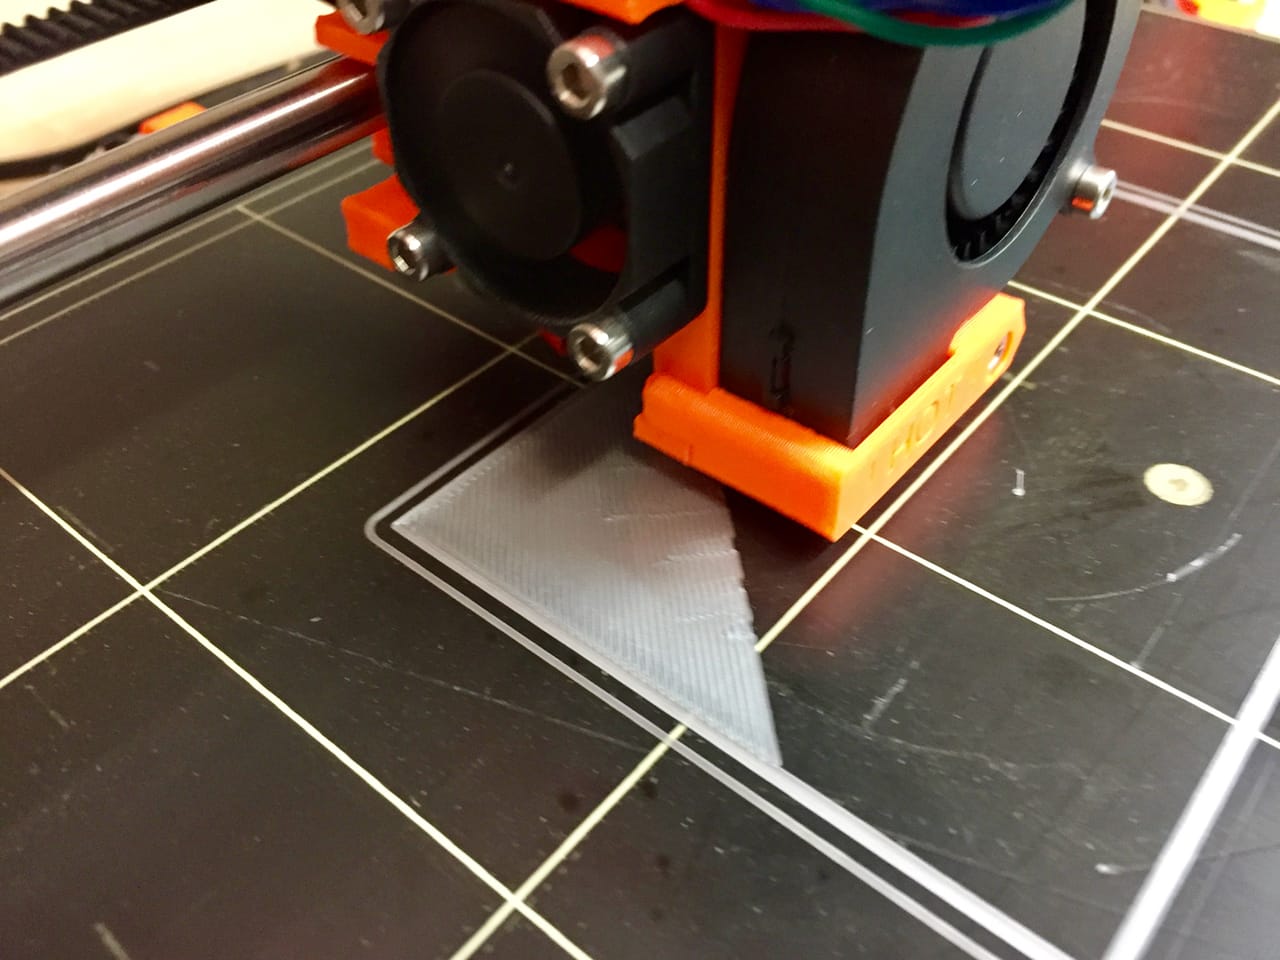  How to make that 3D printer even better 